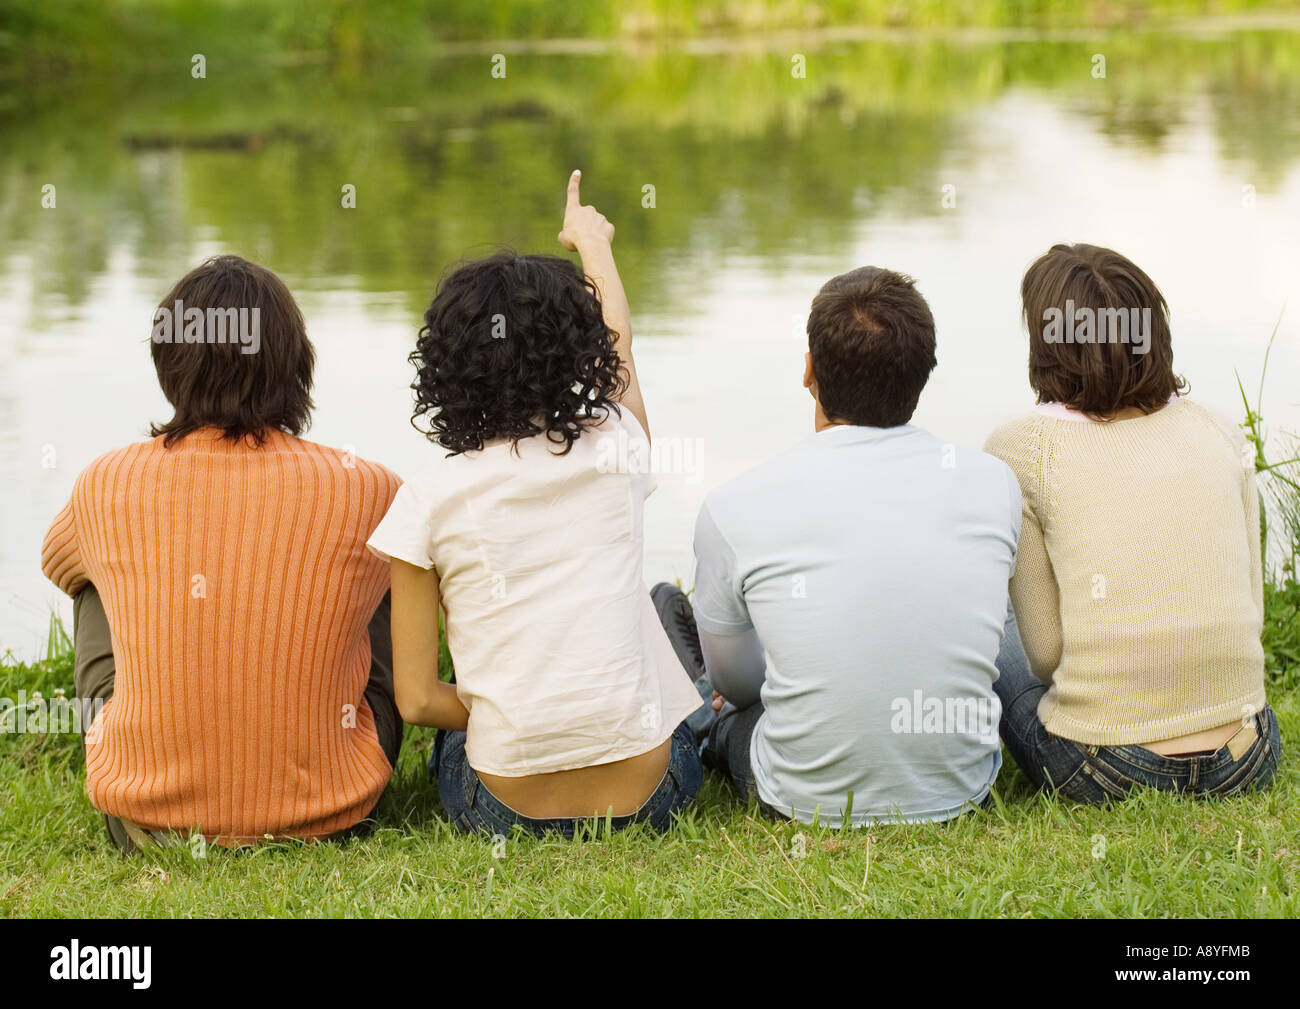 Four friends sitting near the edge of a pond, one pointing, rear ...